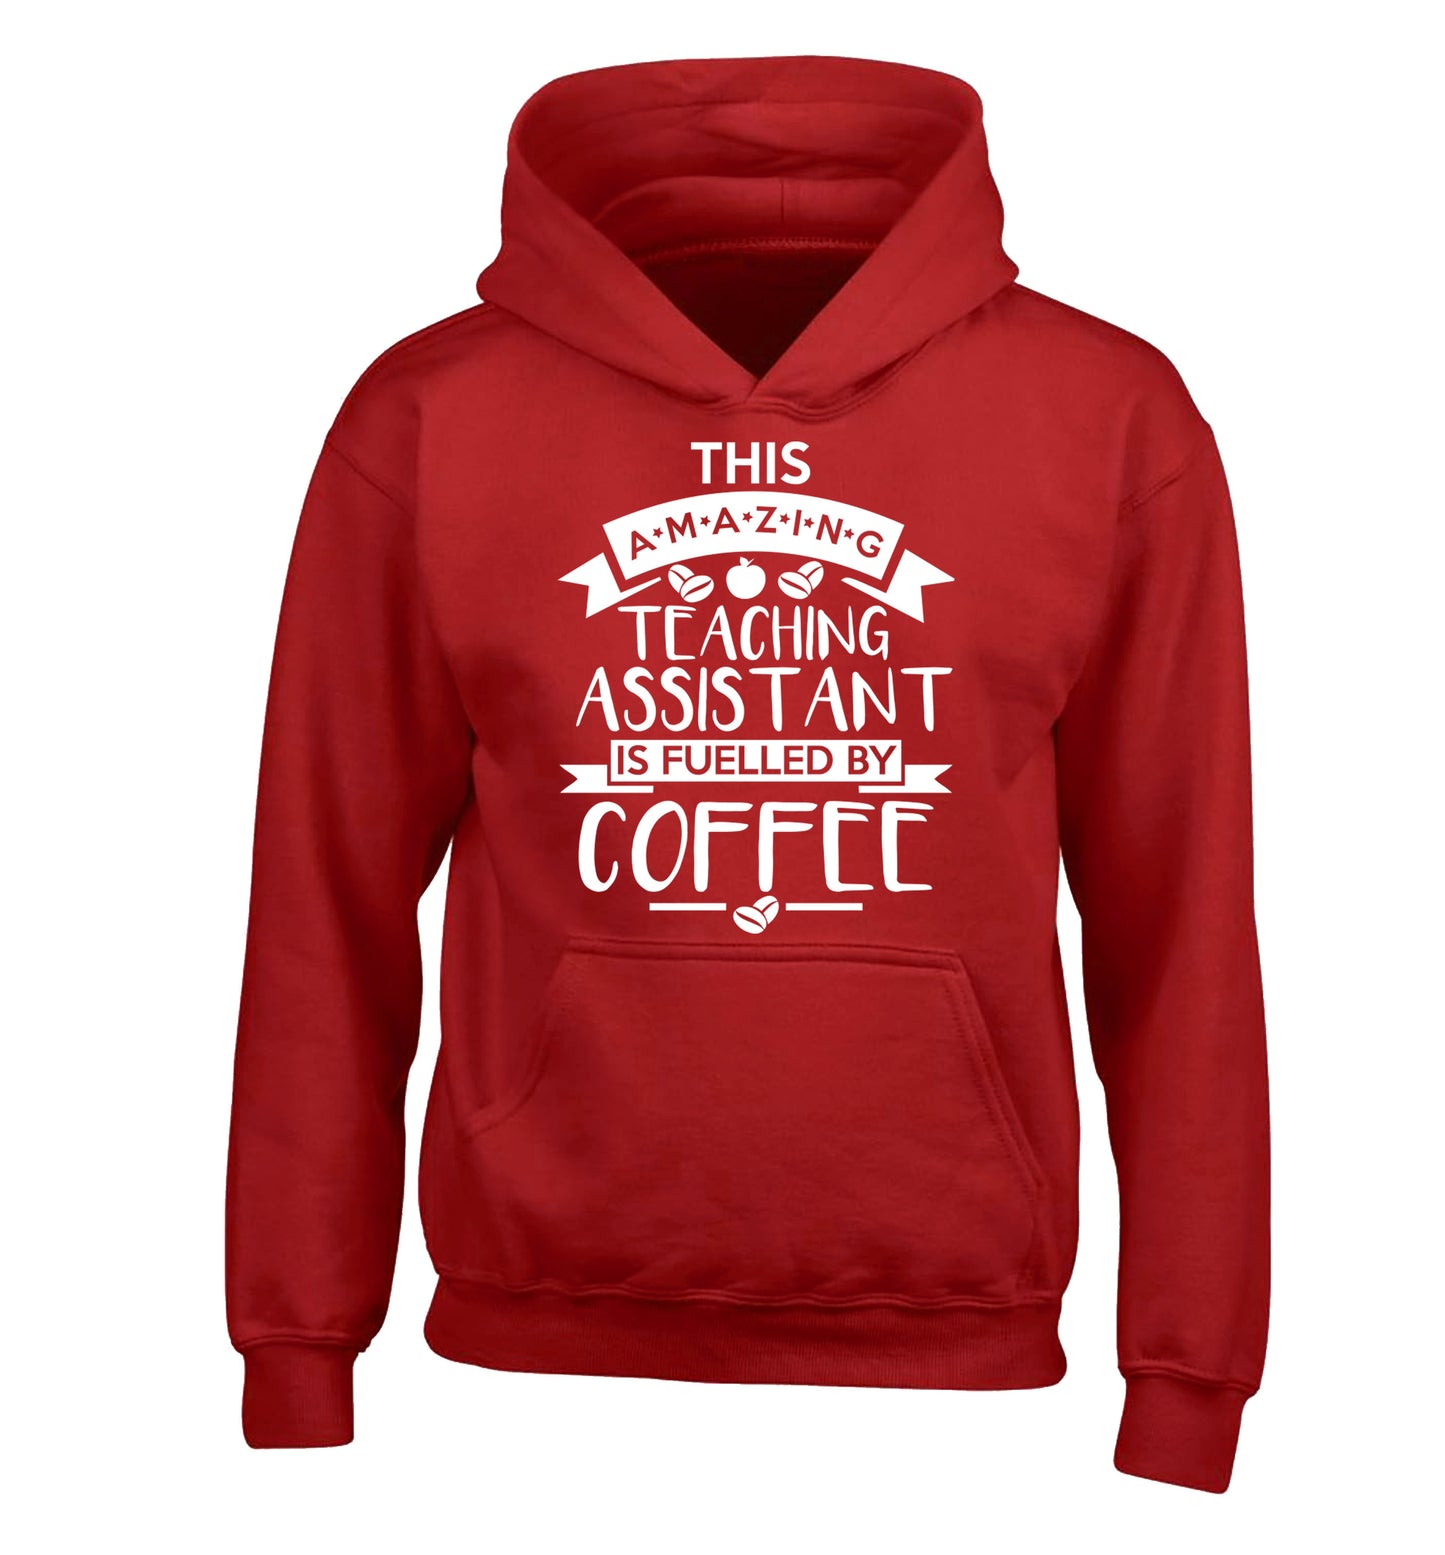 This amazing teaching assistant is fuelled by coffee children's red hoodie 12-13 Years